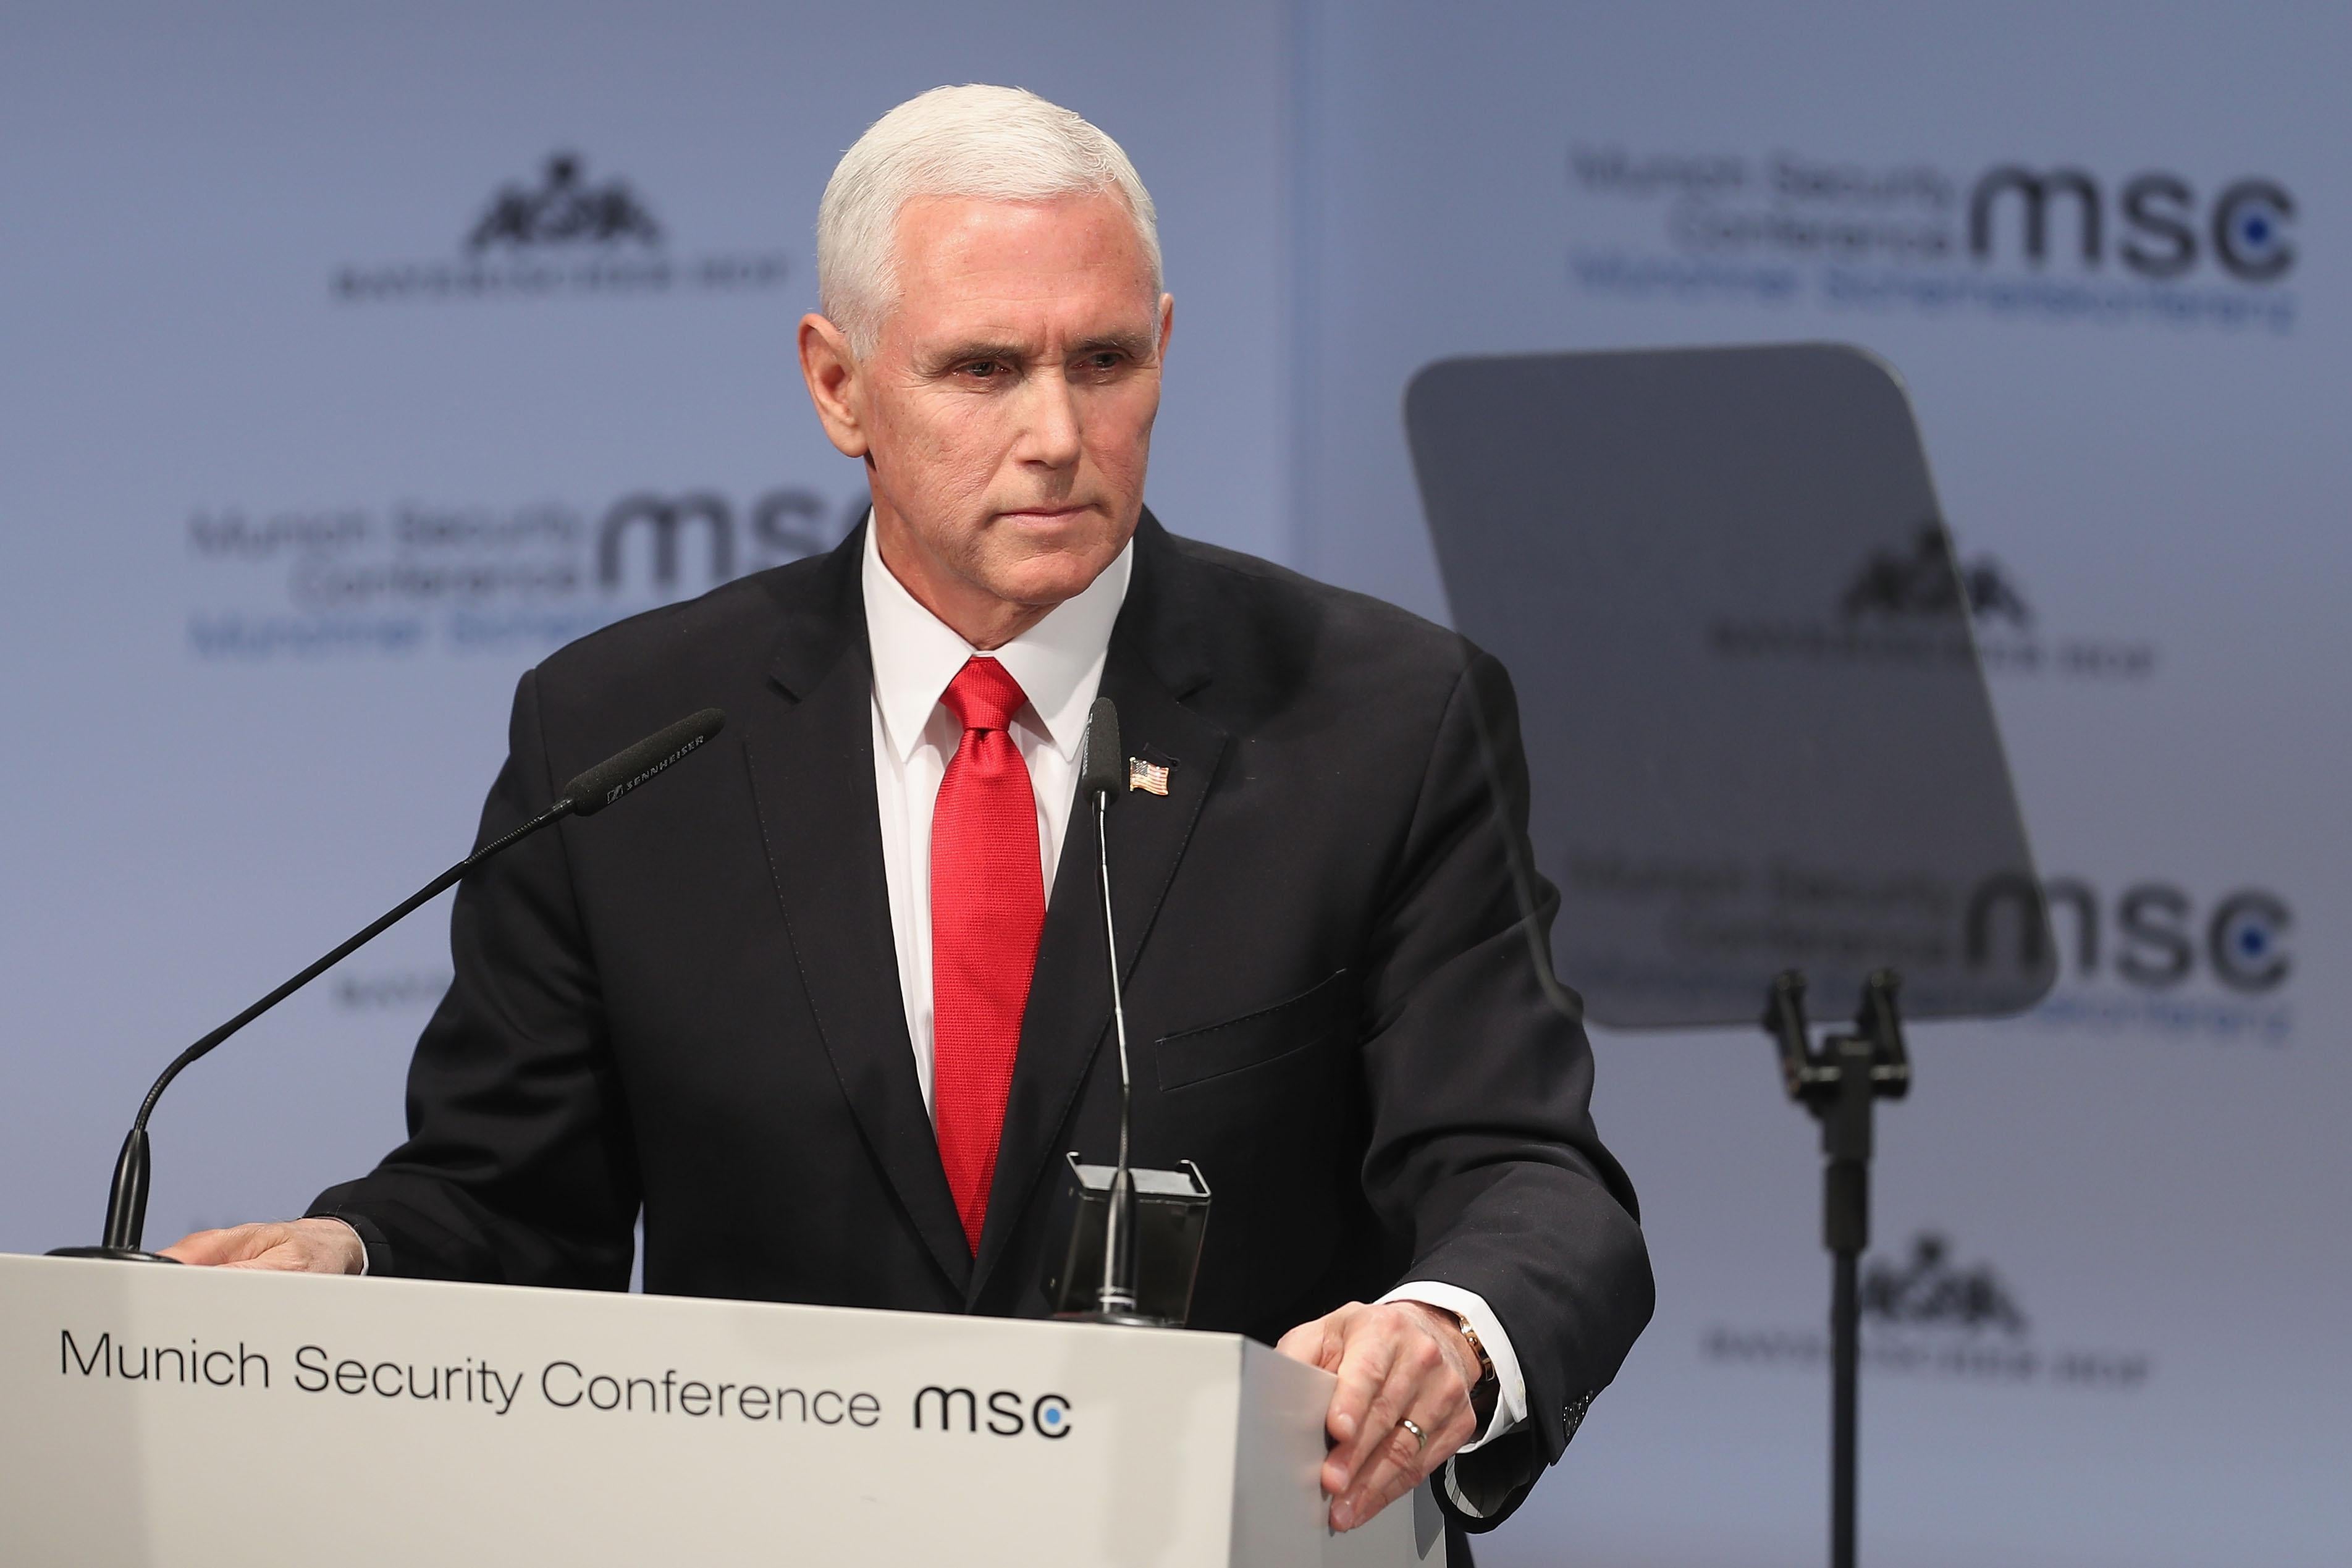 Vice President Michael Pence gives a speech during the 55th Munich Security Conference (MSC) on February 16, 2019 in Munich, Germany.